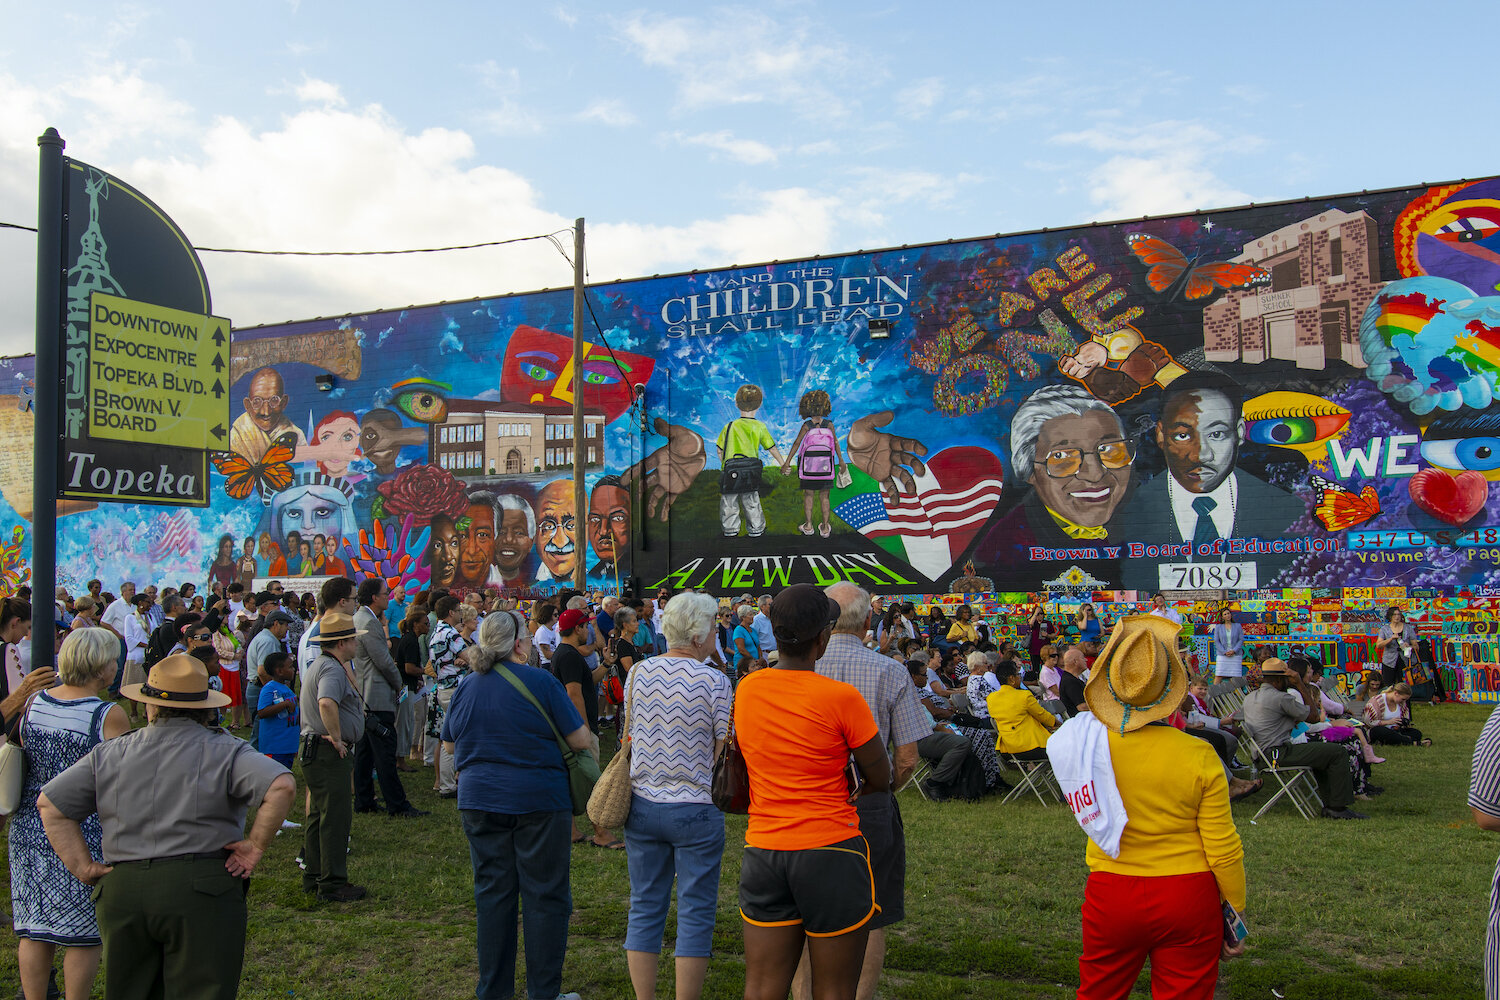 Kansas Creative Arts Industries Commission Announces Kansas Roster for Mural and Public Art Now Accepting Artist Applications through November 29, 2021